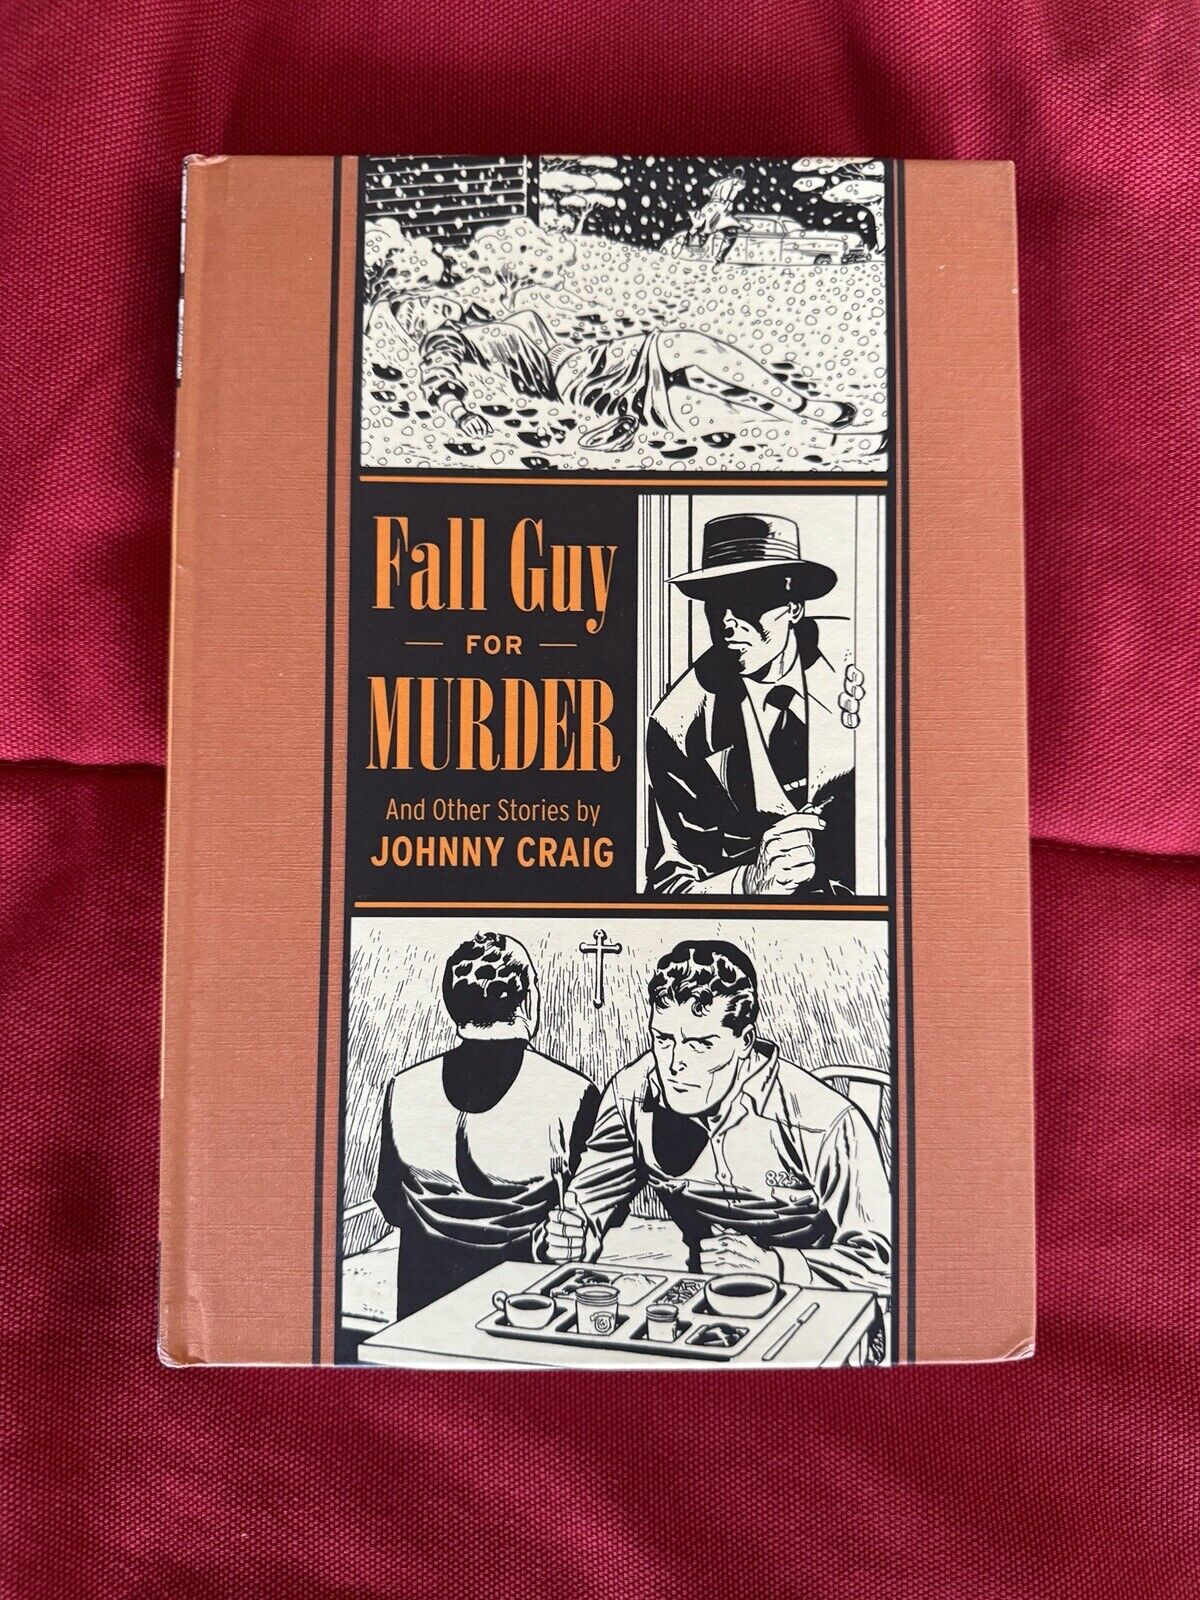 Fall Guy For Murder & Other Stories by Johnny Craig (Fantagraphics, 2013) EC